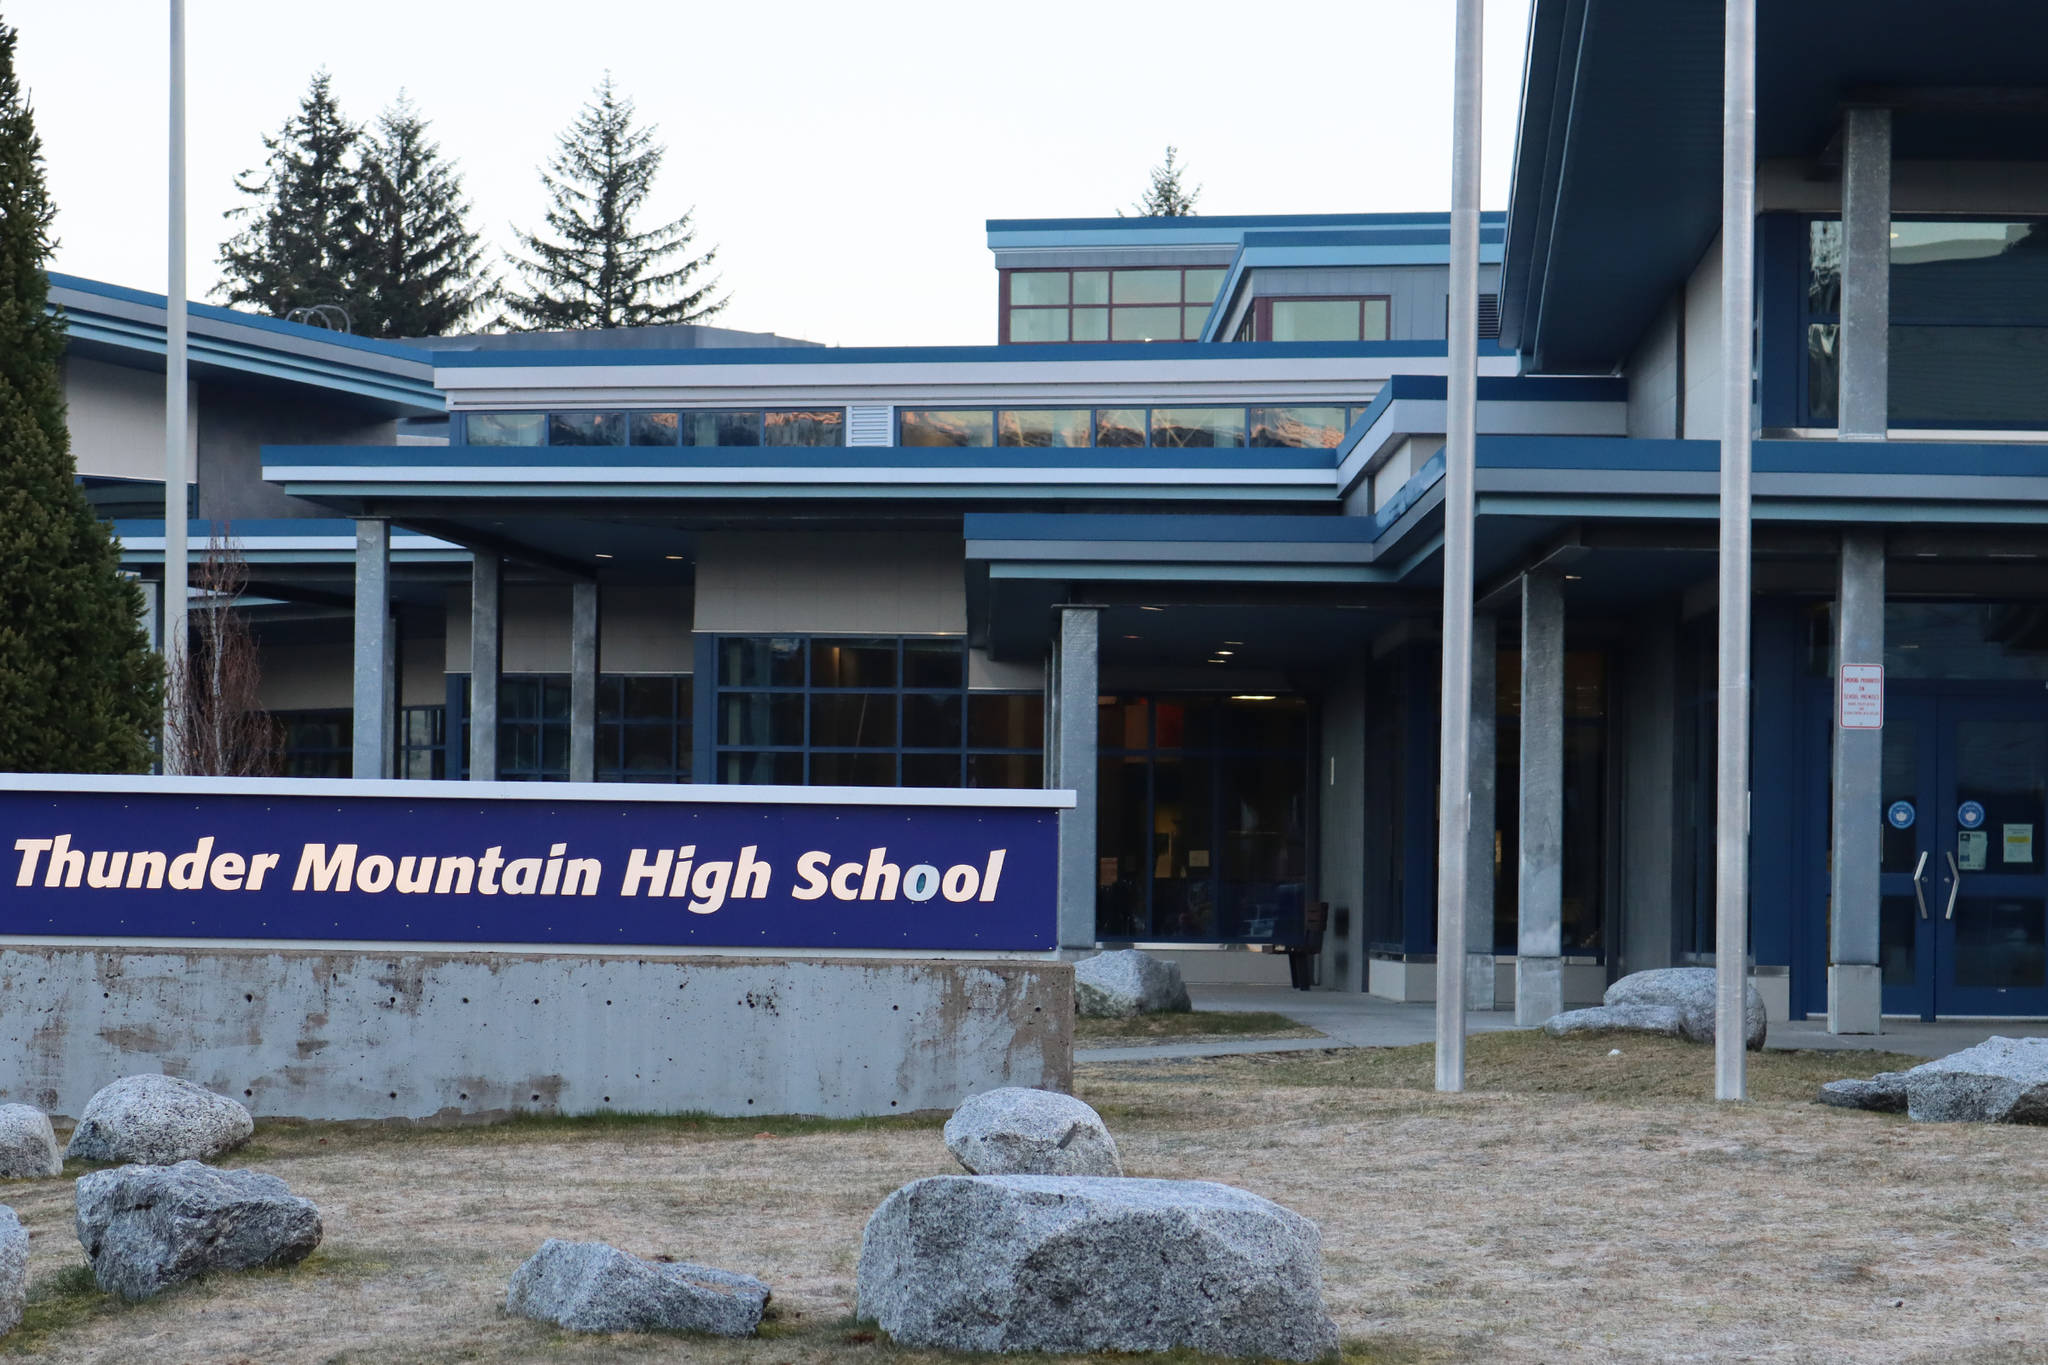 Thunder Mountain High School on April 18, 2021. When school resumes in the fall, John Luhrs will serve as the interim principal. The search for a new assistant principal continues.	(Ben Hohenstatt / Juneau Empire)